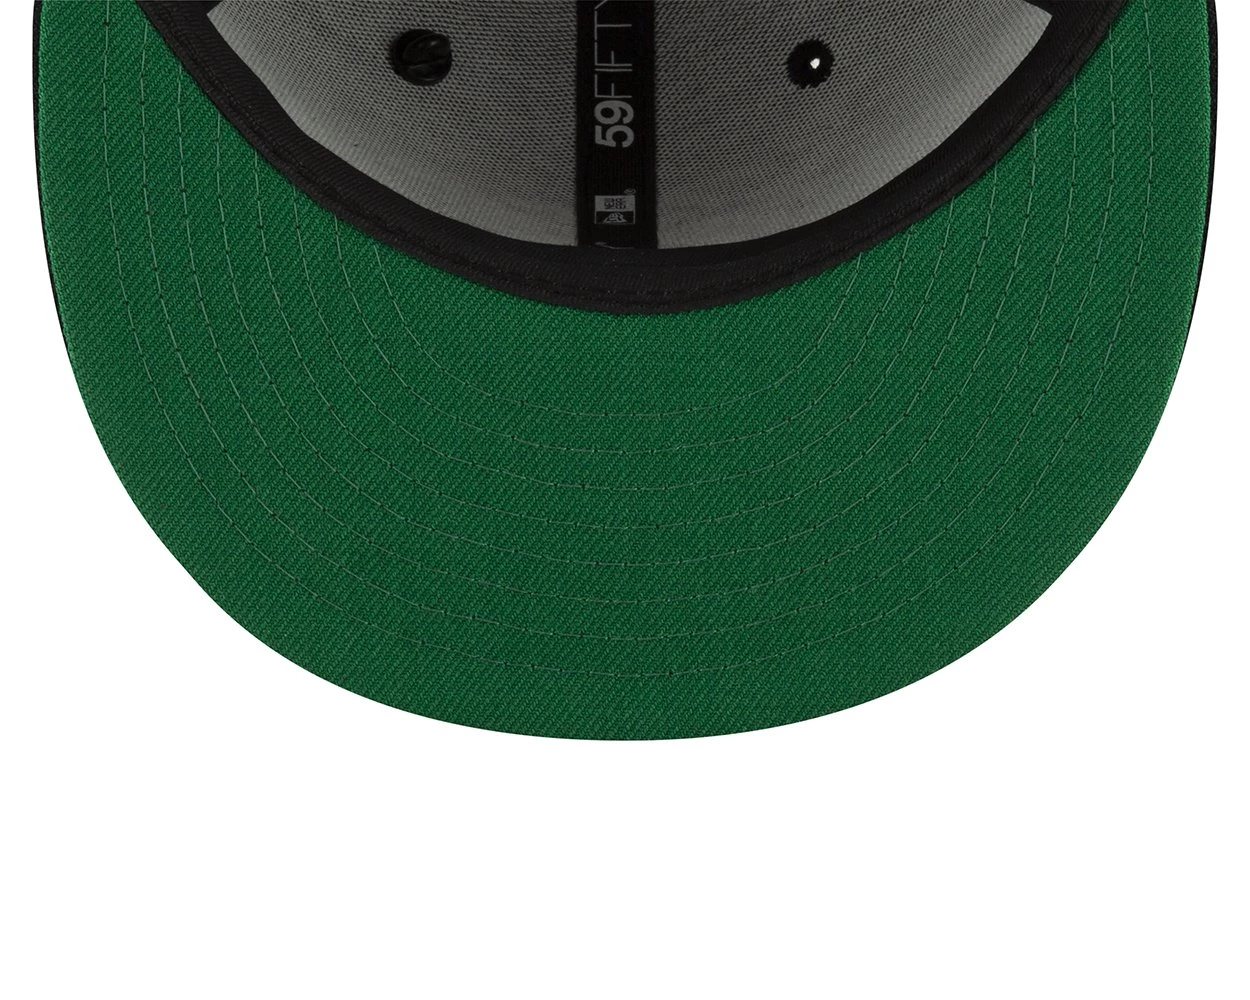 New Era Paper Planes 59FIFTY Fitted Hat | Jay Z Fitted Hat